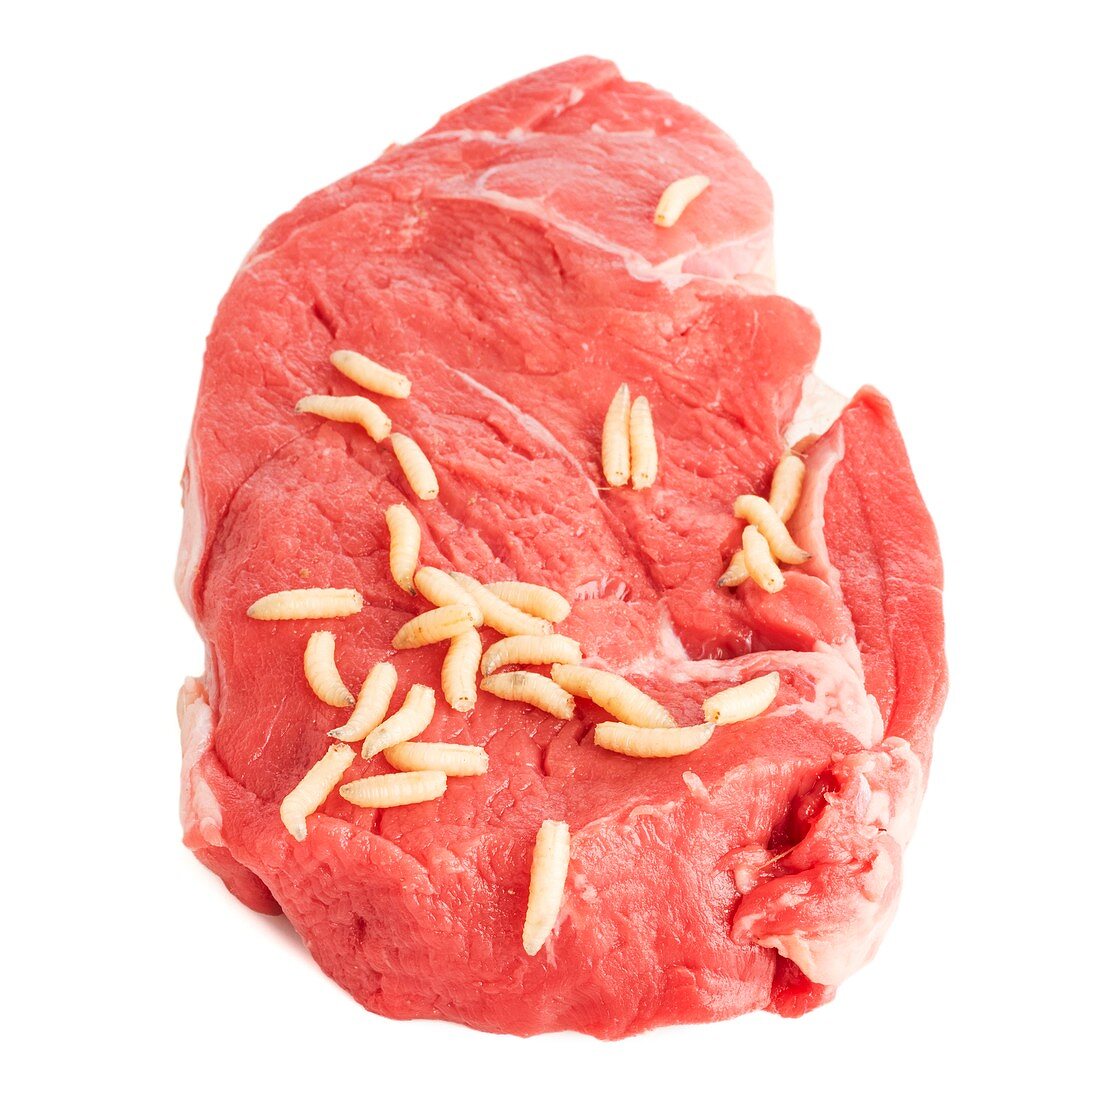 Maggots on meat